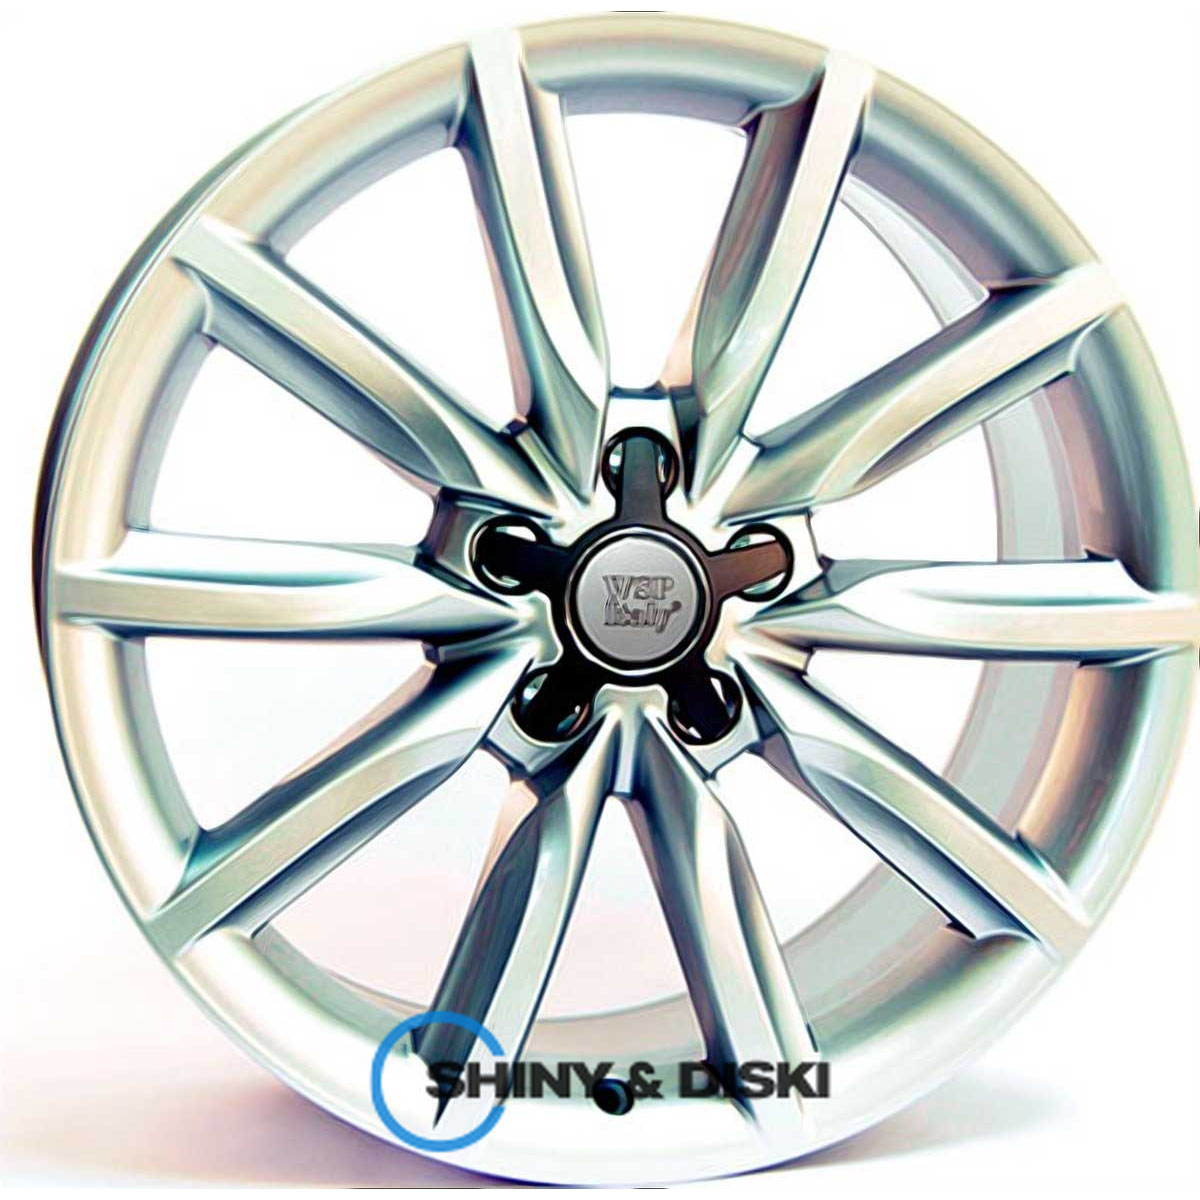 wsp italy audi w550 allroad canyon s r18 w8 pcd5x112 et31 dia66.6